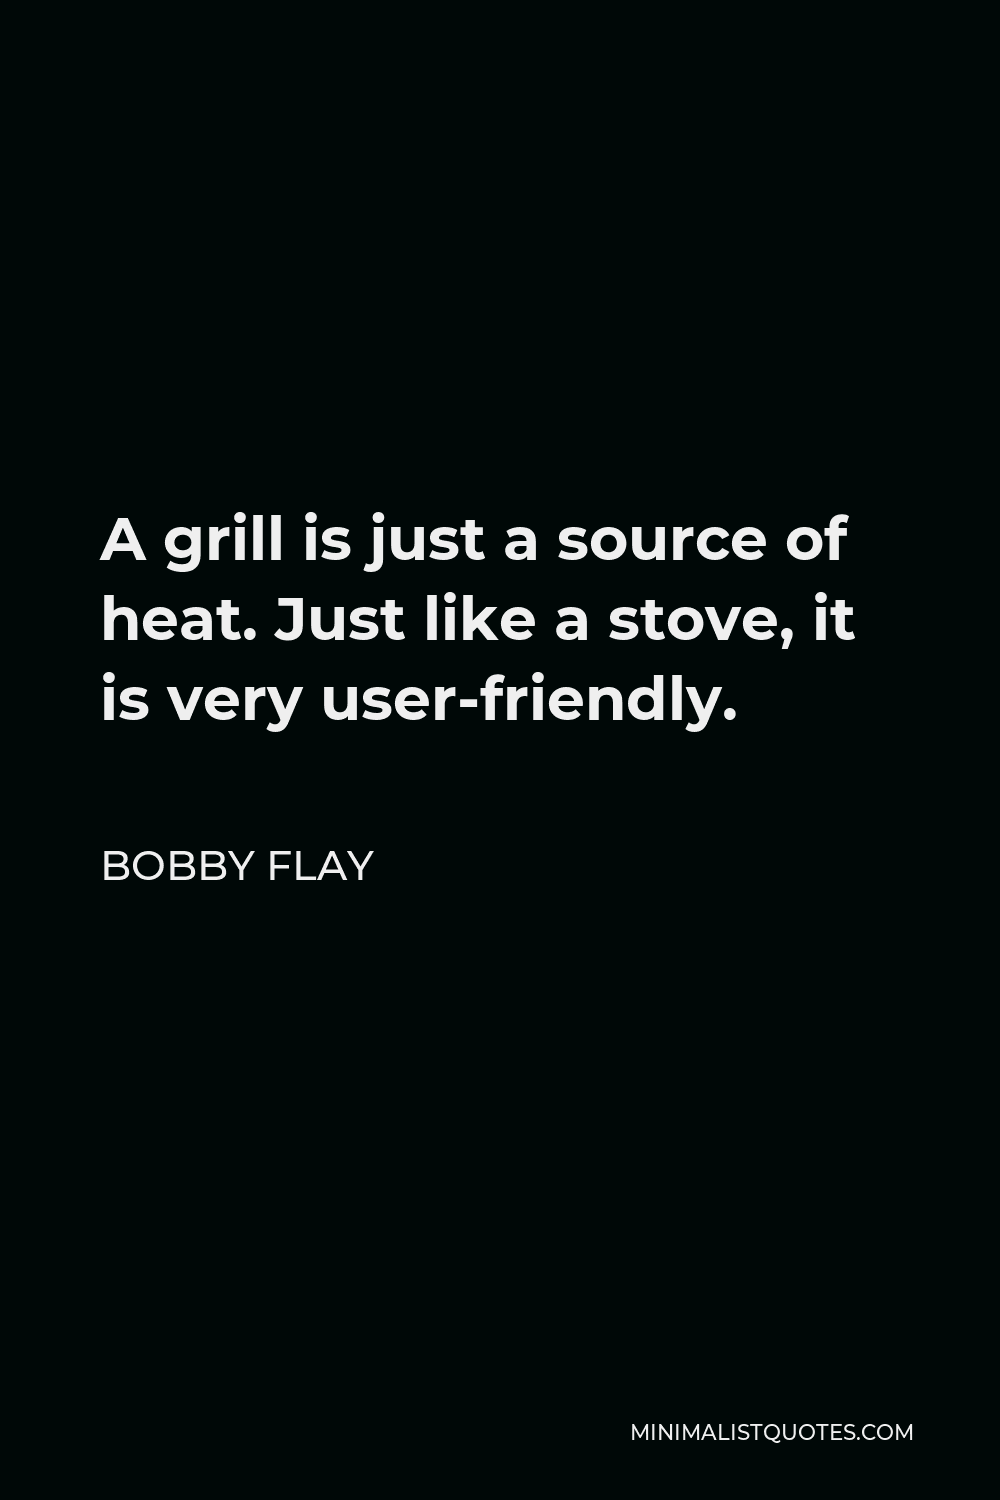 Bobby Flay Quote - A grill is just a source of heat. Just like a stove, it is very user-friendly.